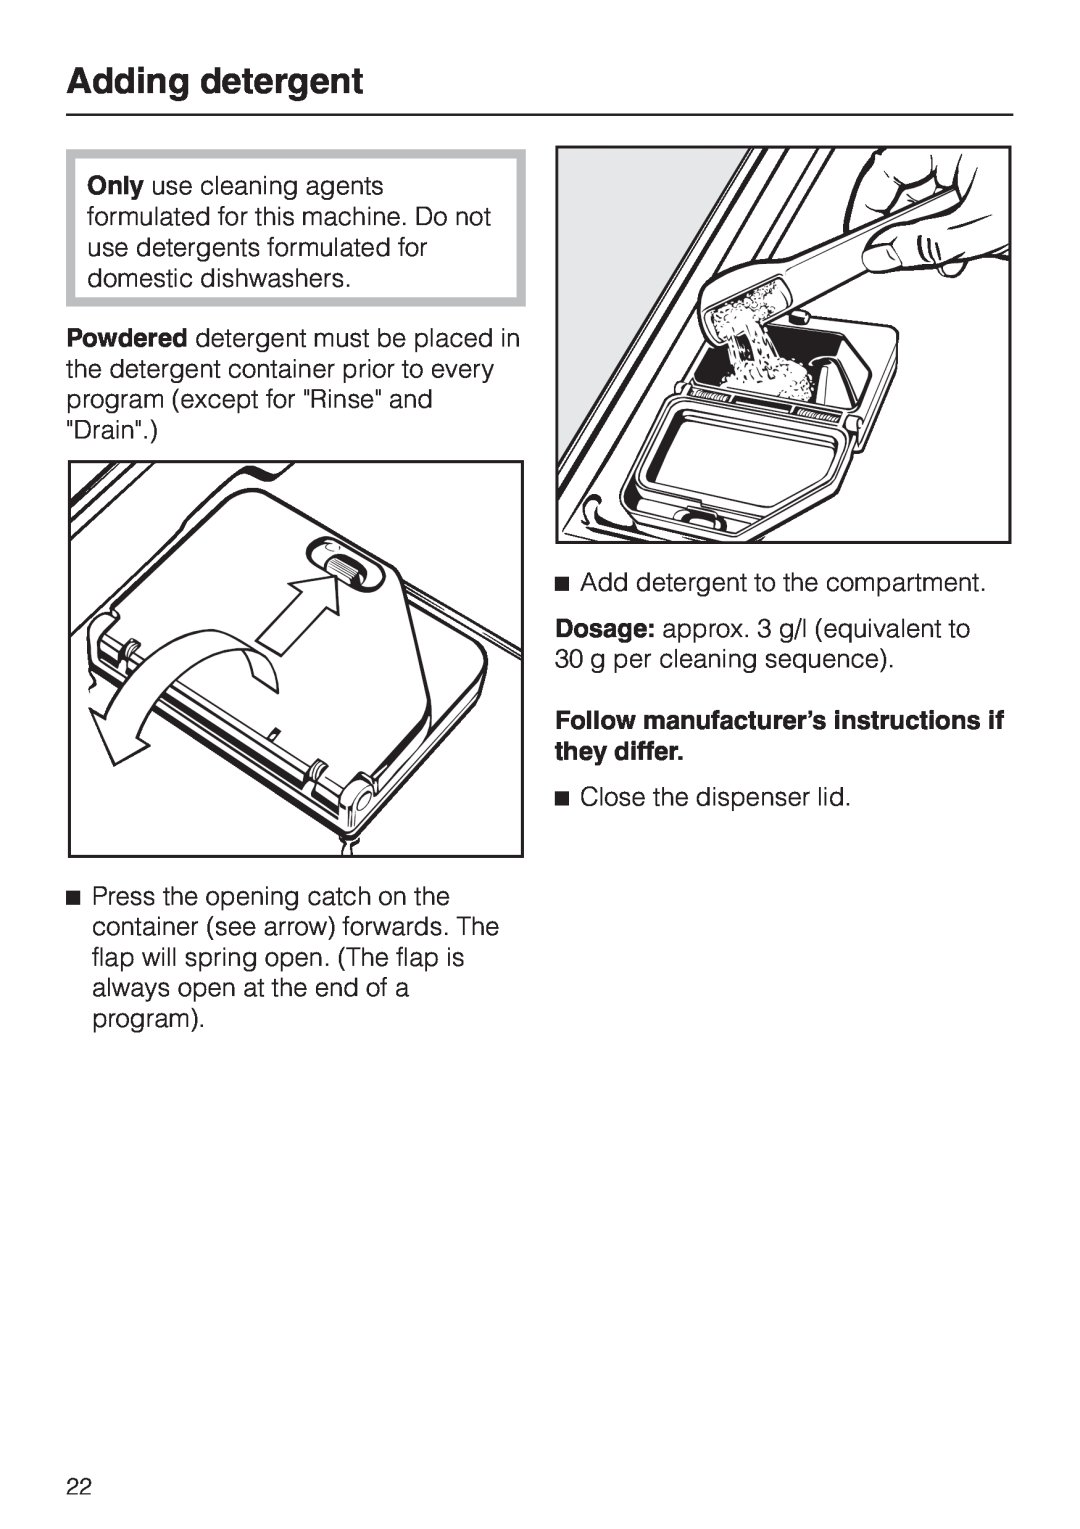 Miele G 7804 Adding detergent, Add detergent to the compartment, Follow manufacturer’s instructions if they differ 